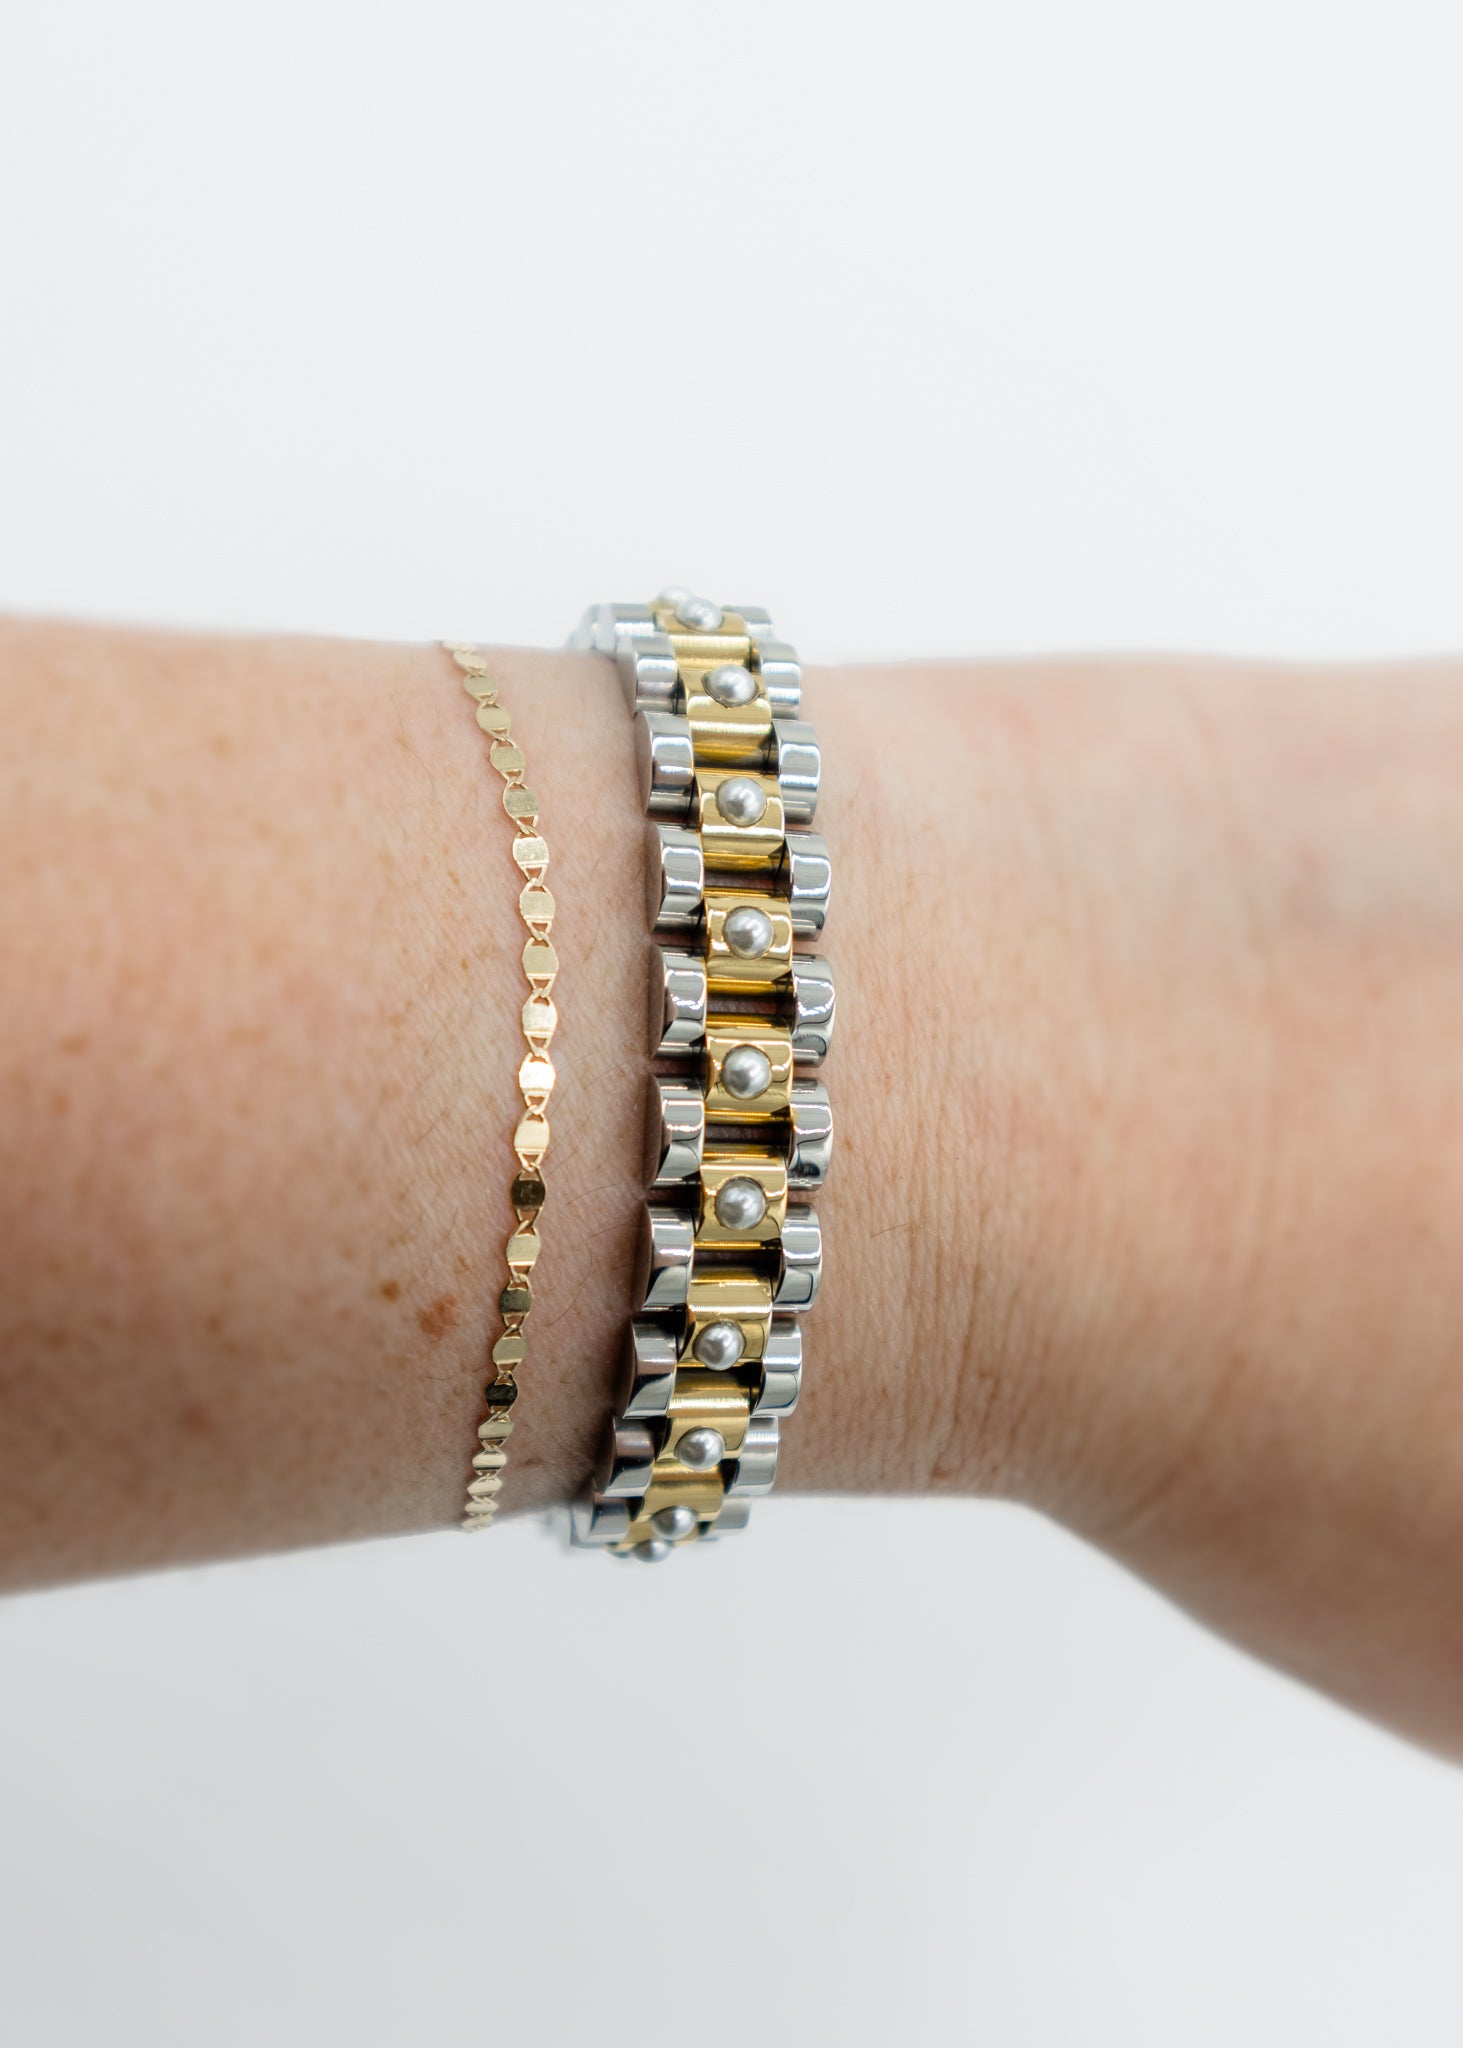 The Pearl Two-Toned Watch Band Bracelet